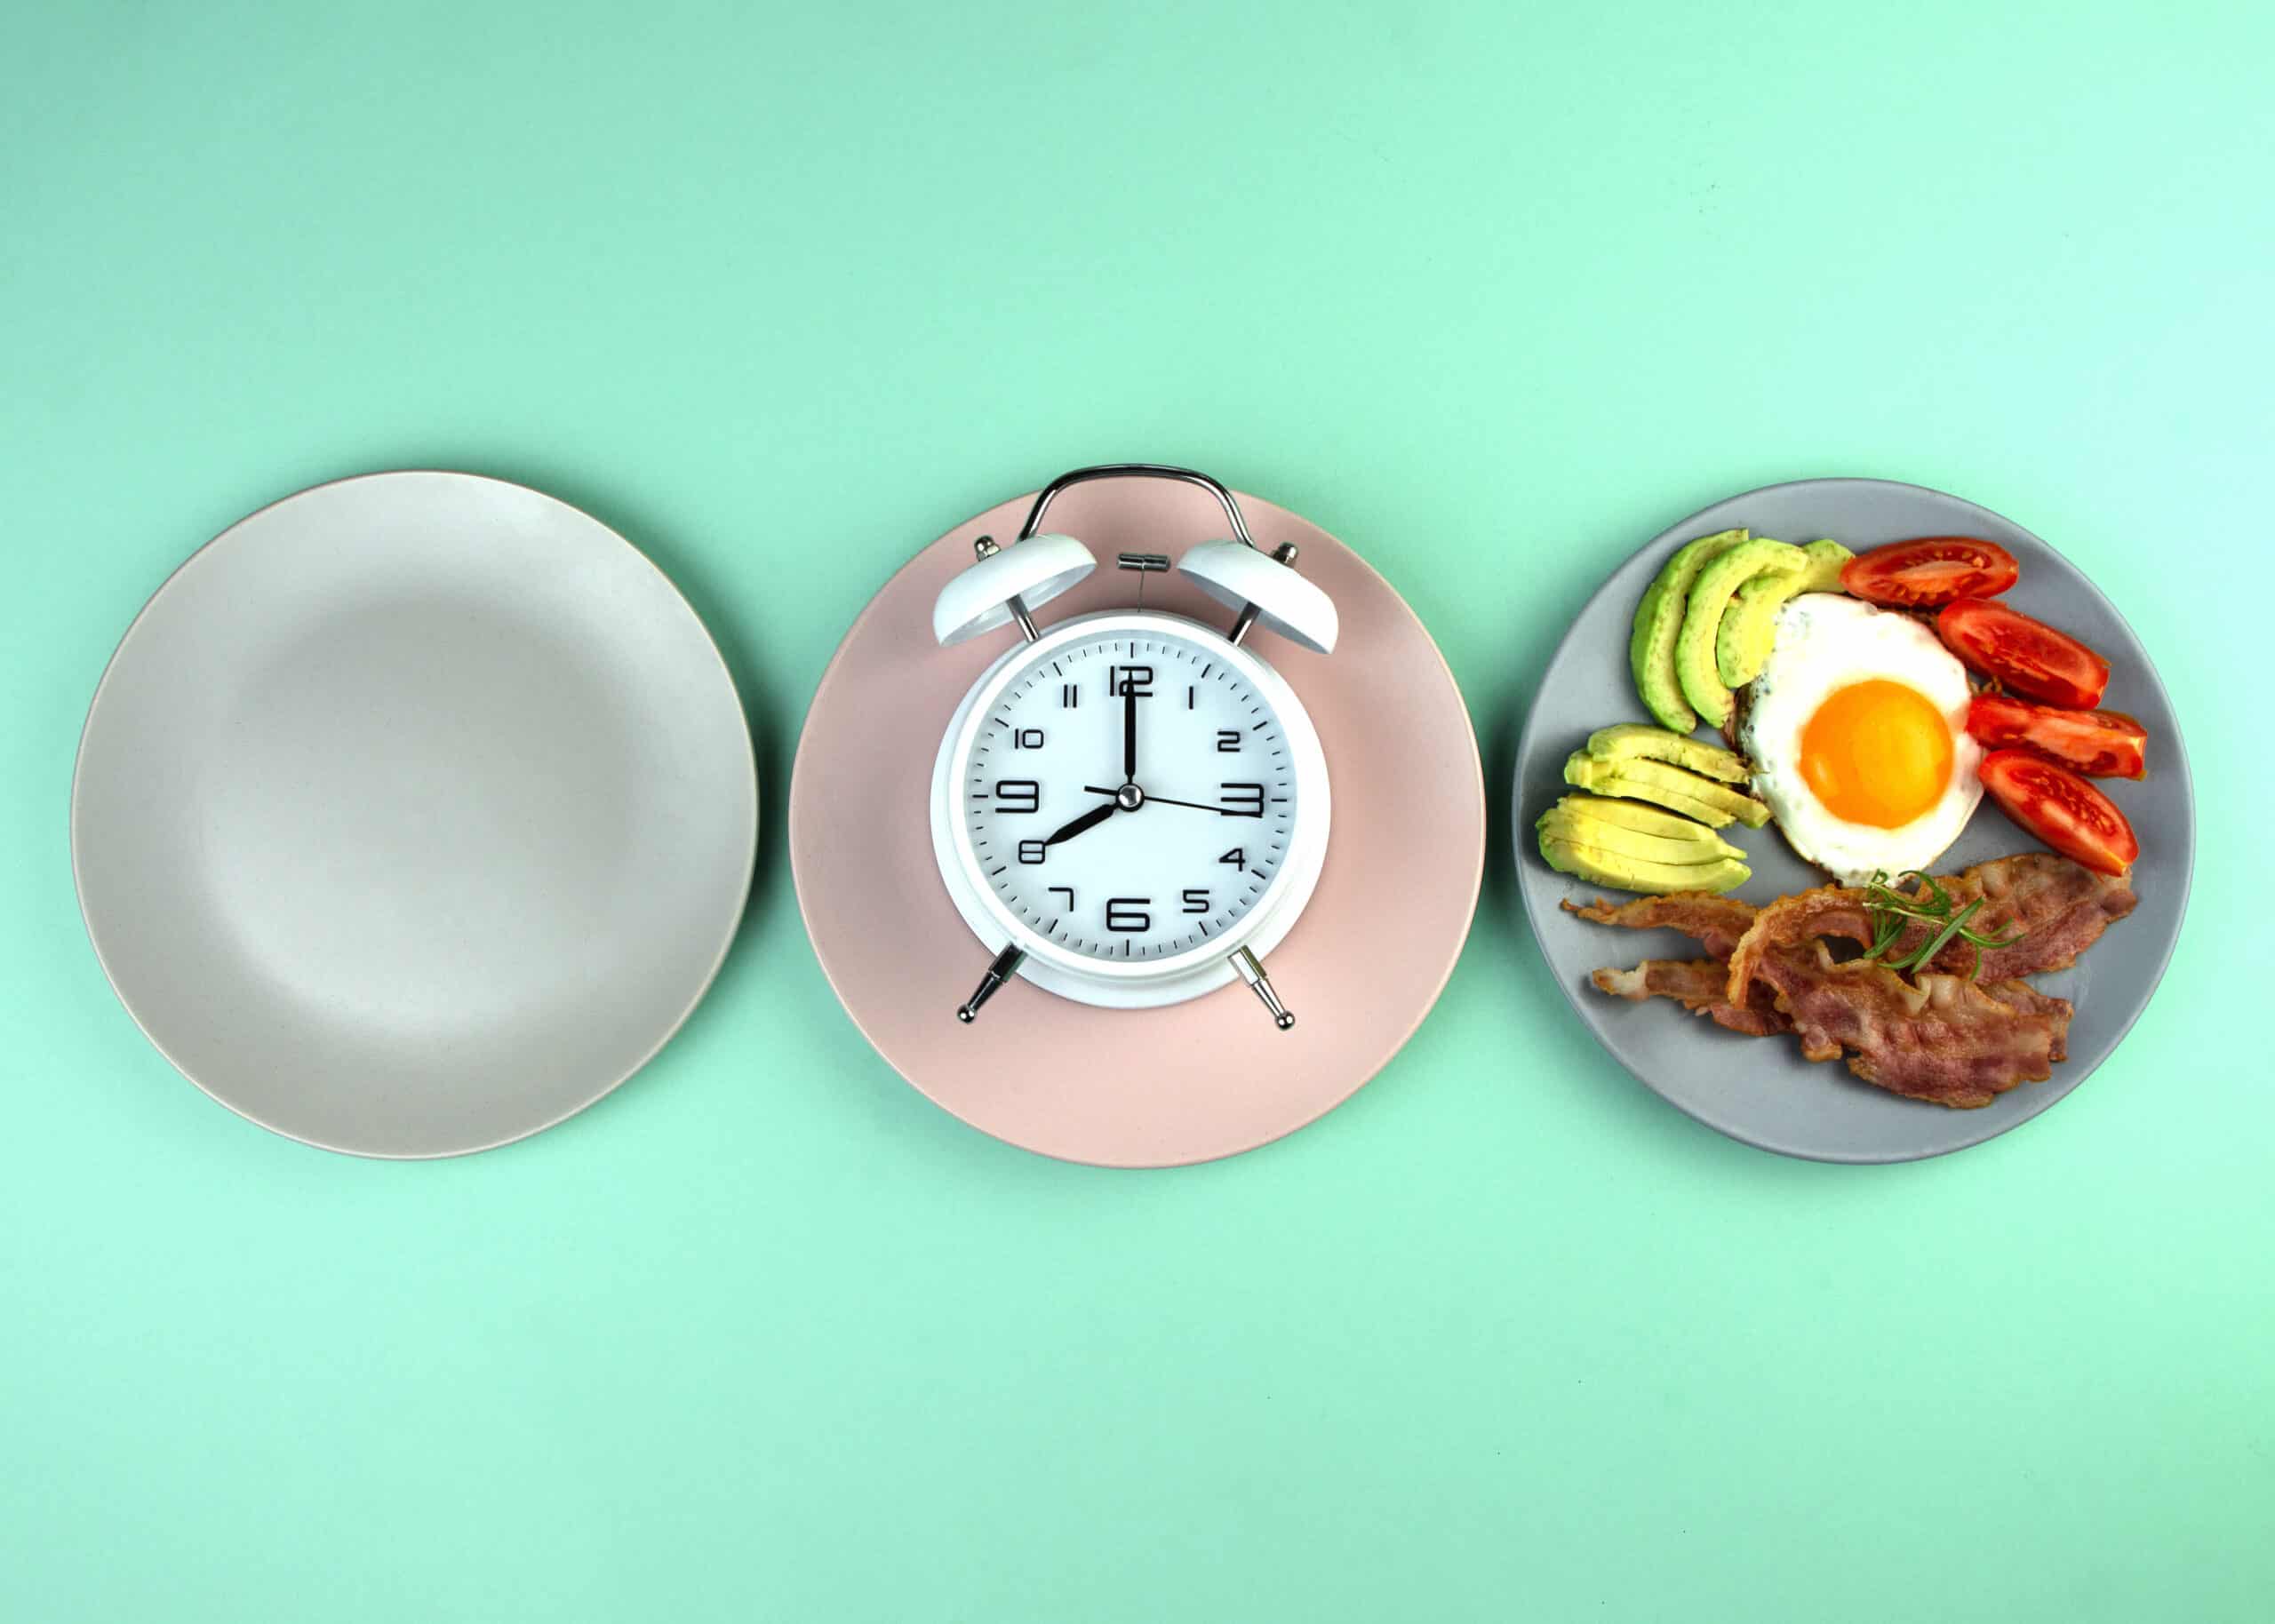 Intermittent fasting includes strategies employed by people often trying to lose weight or jump start their metabolic function.